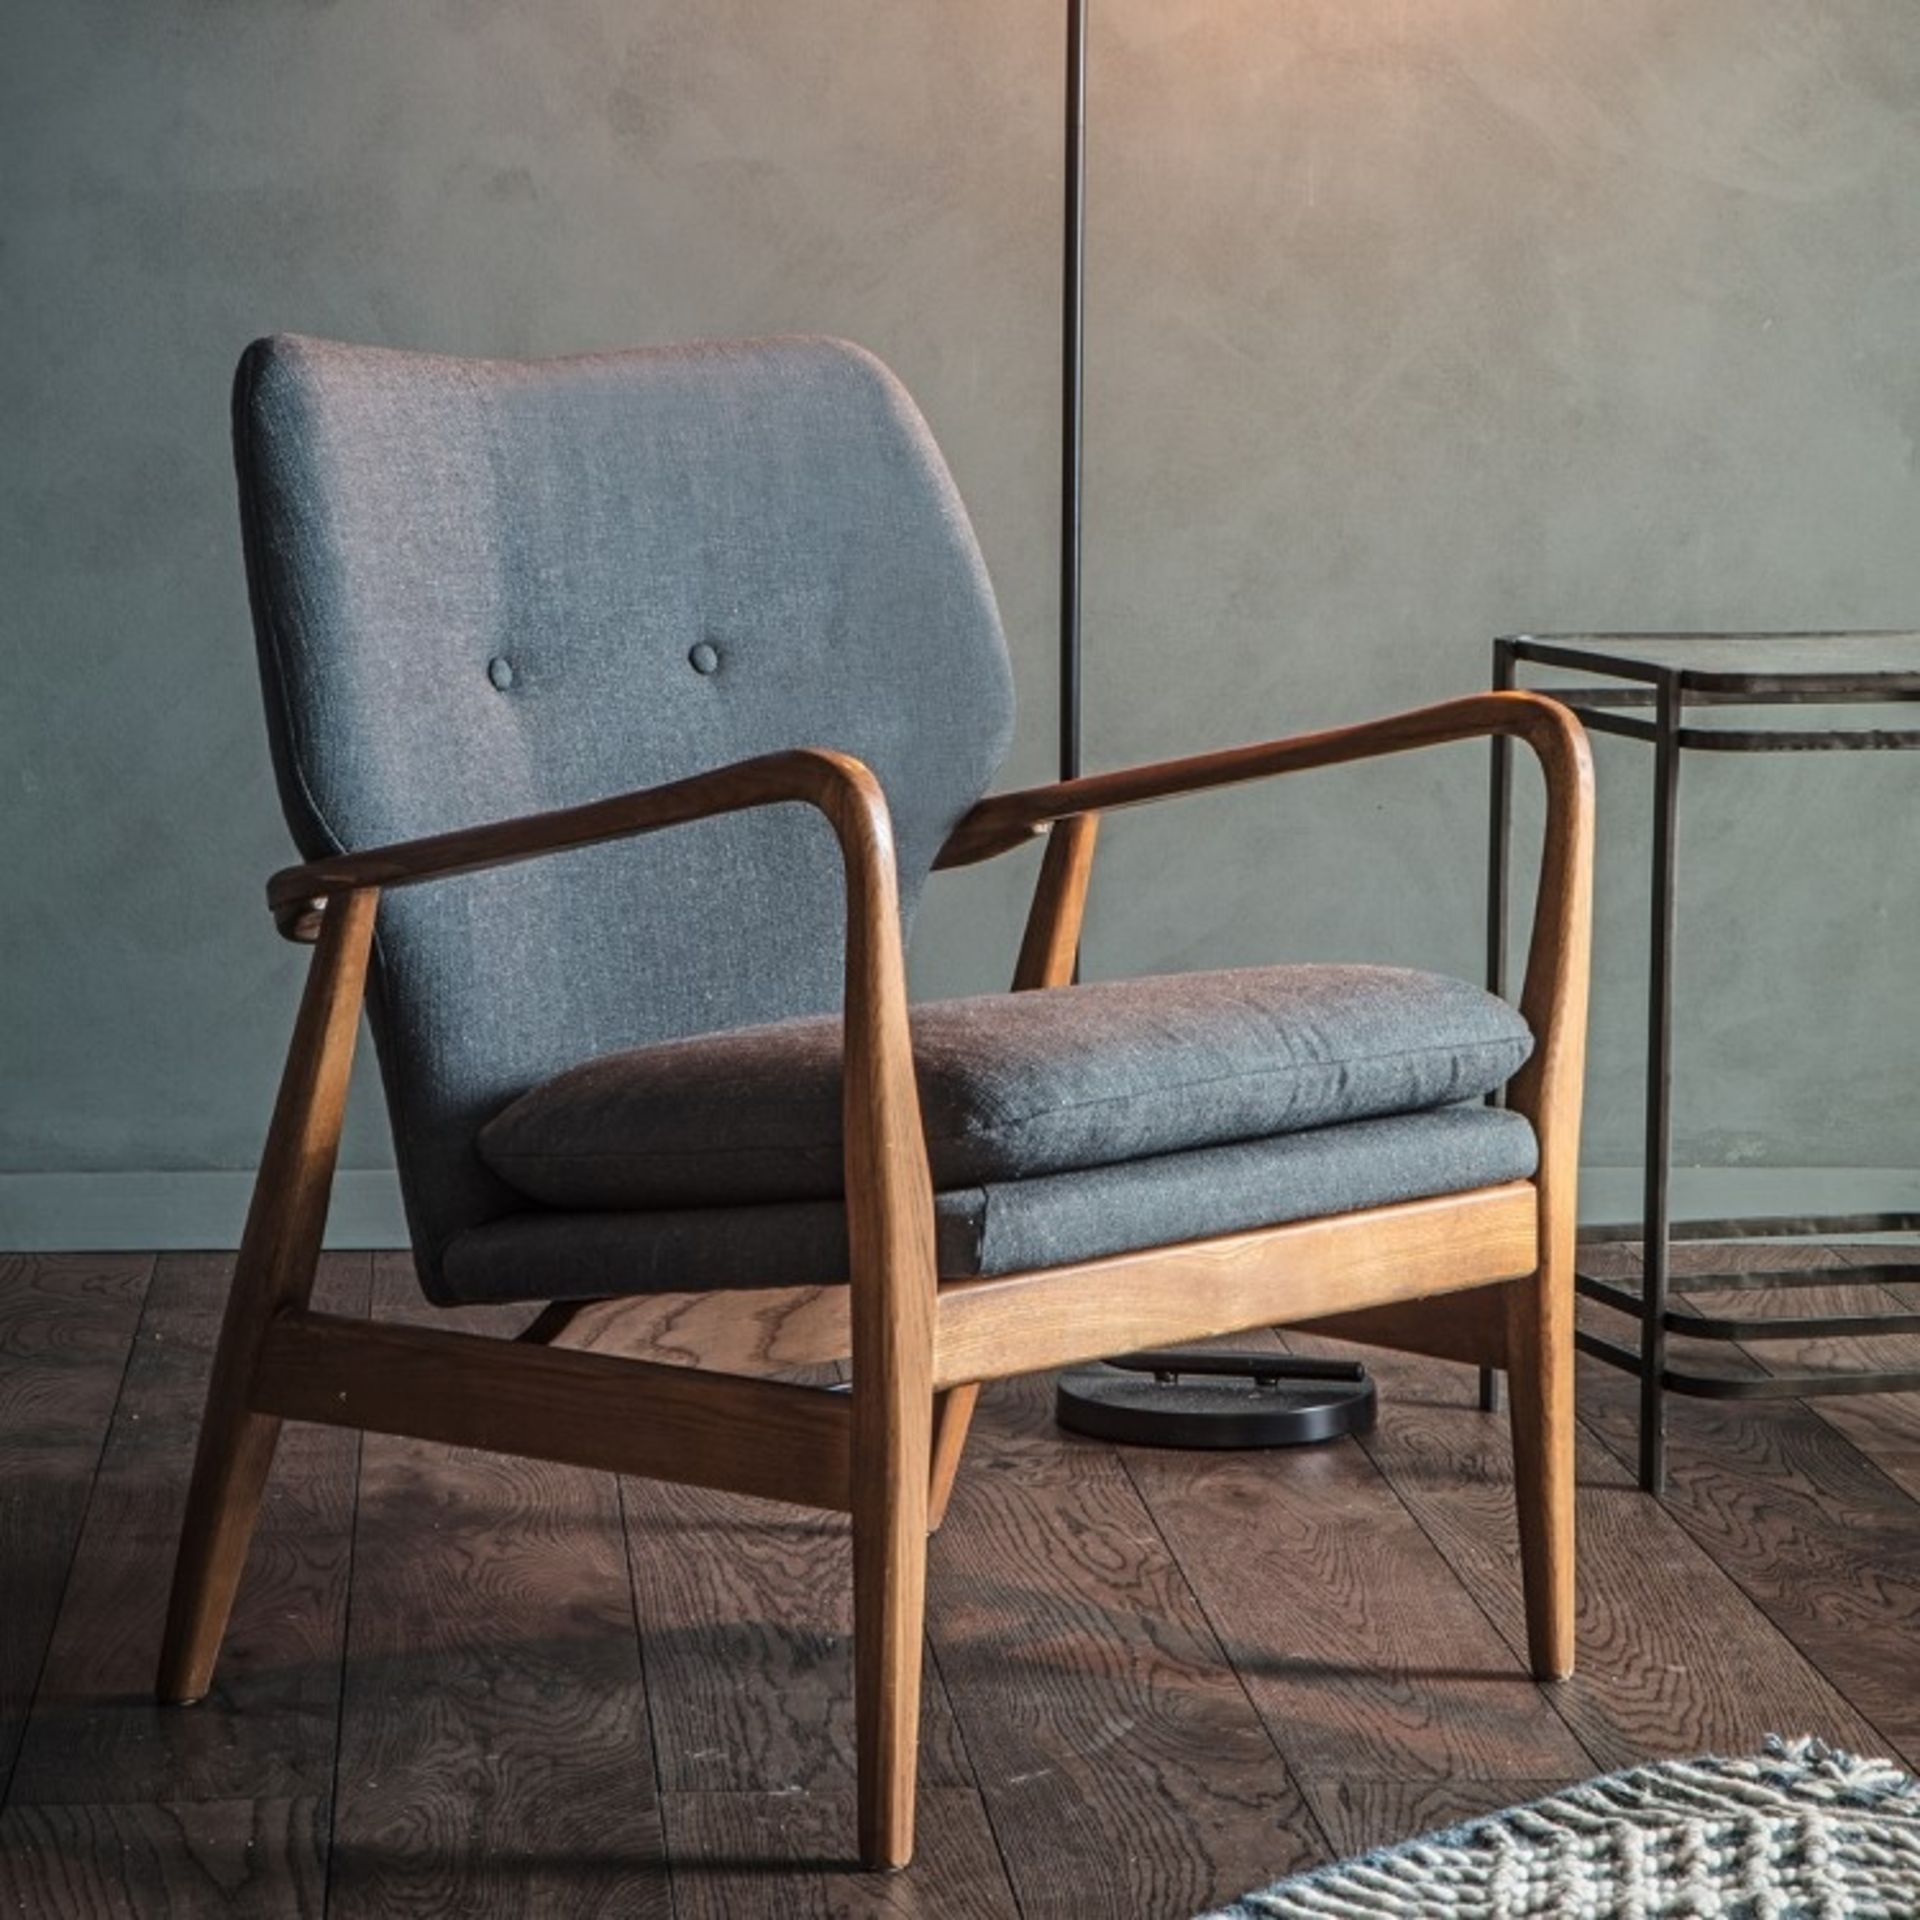 Jensen Armchair Grey Our stunning Jensen Arm Chair in Grey is the perfect addition to any room as an